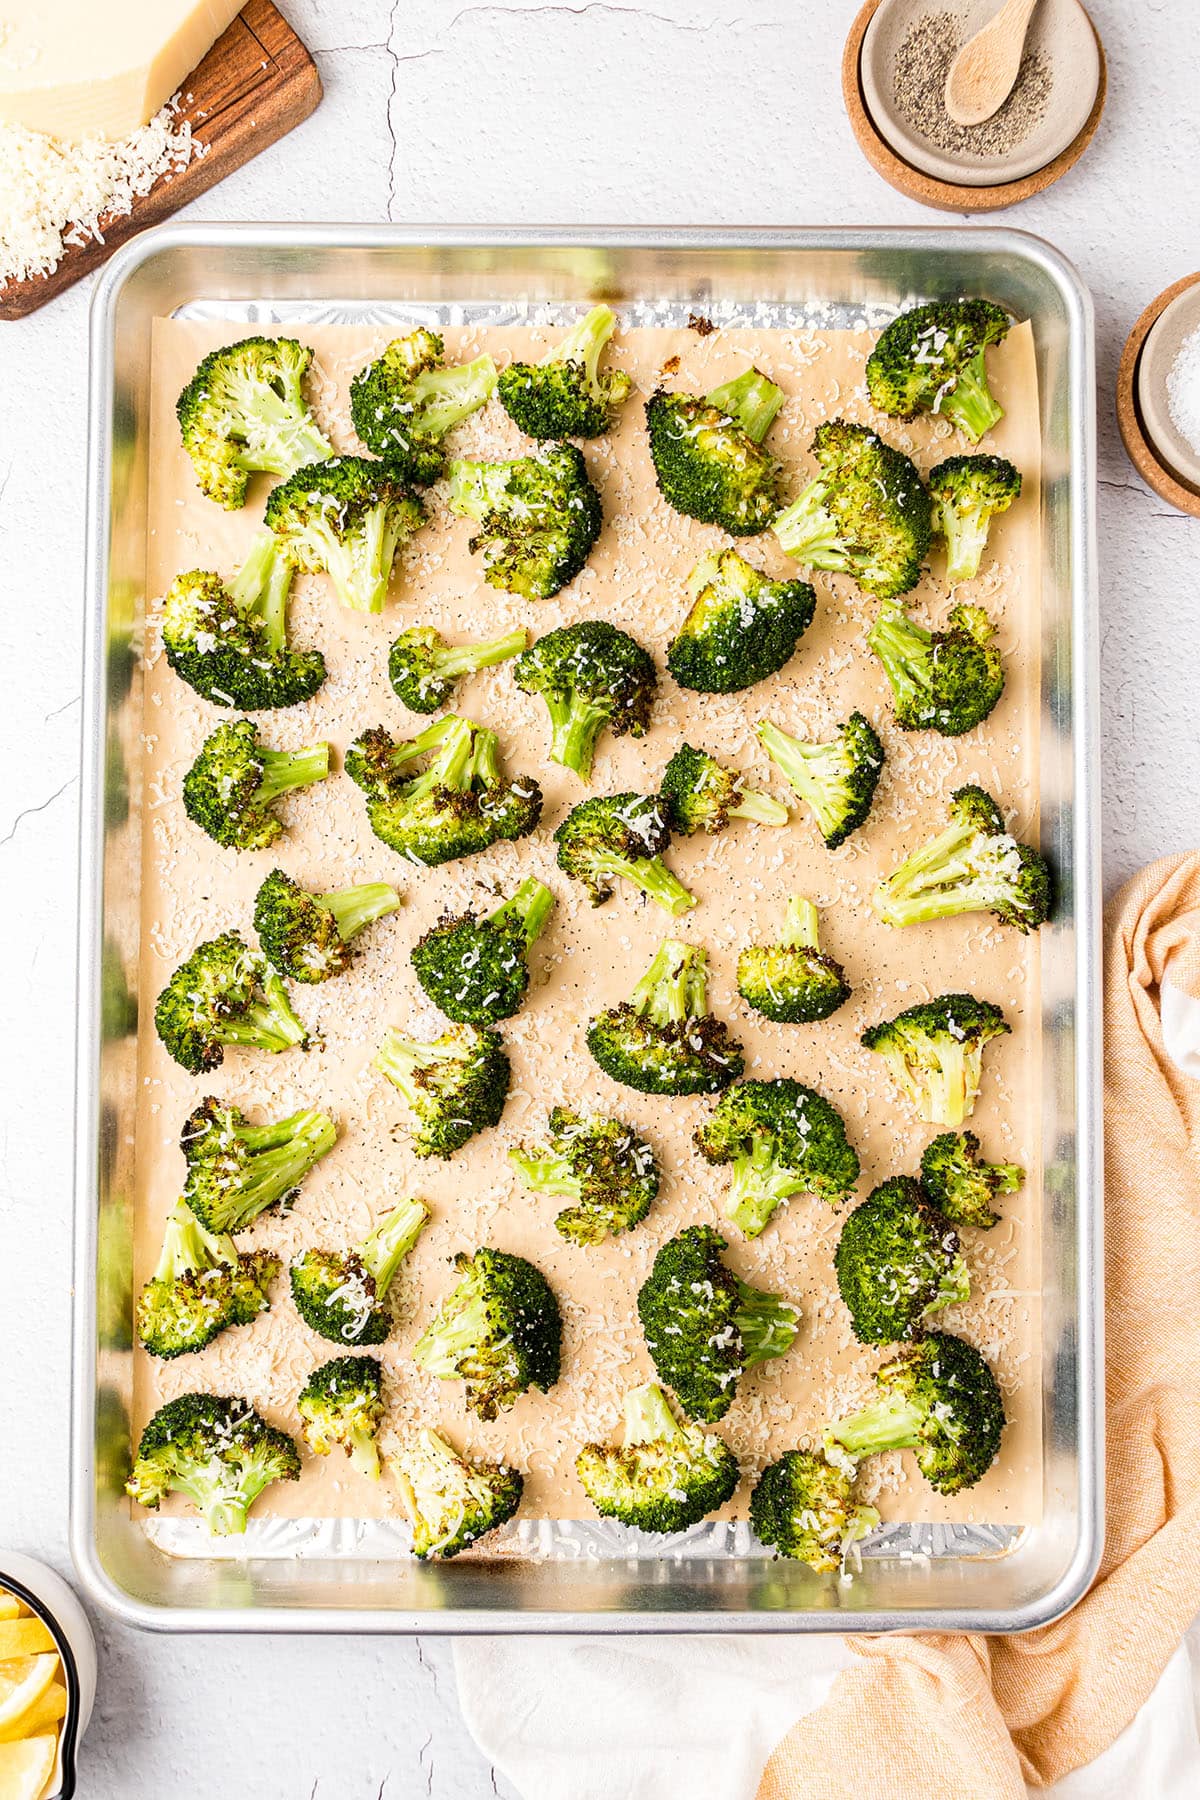 Parmesan Oven Roasted Broccoli, A Favorite Side Dish - TidyMom®